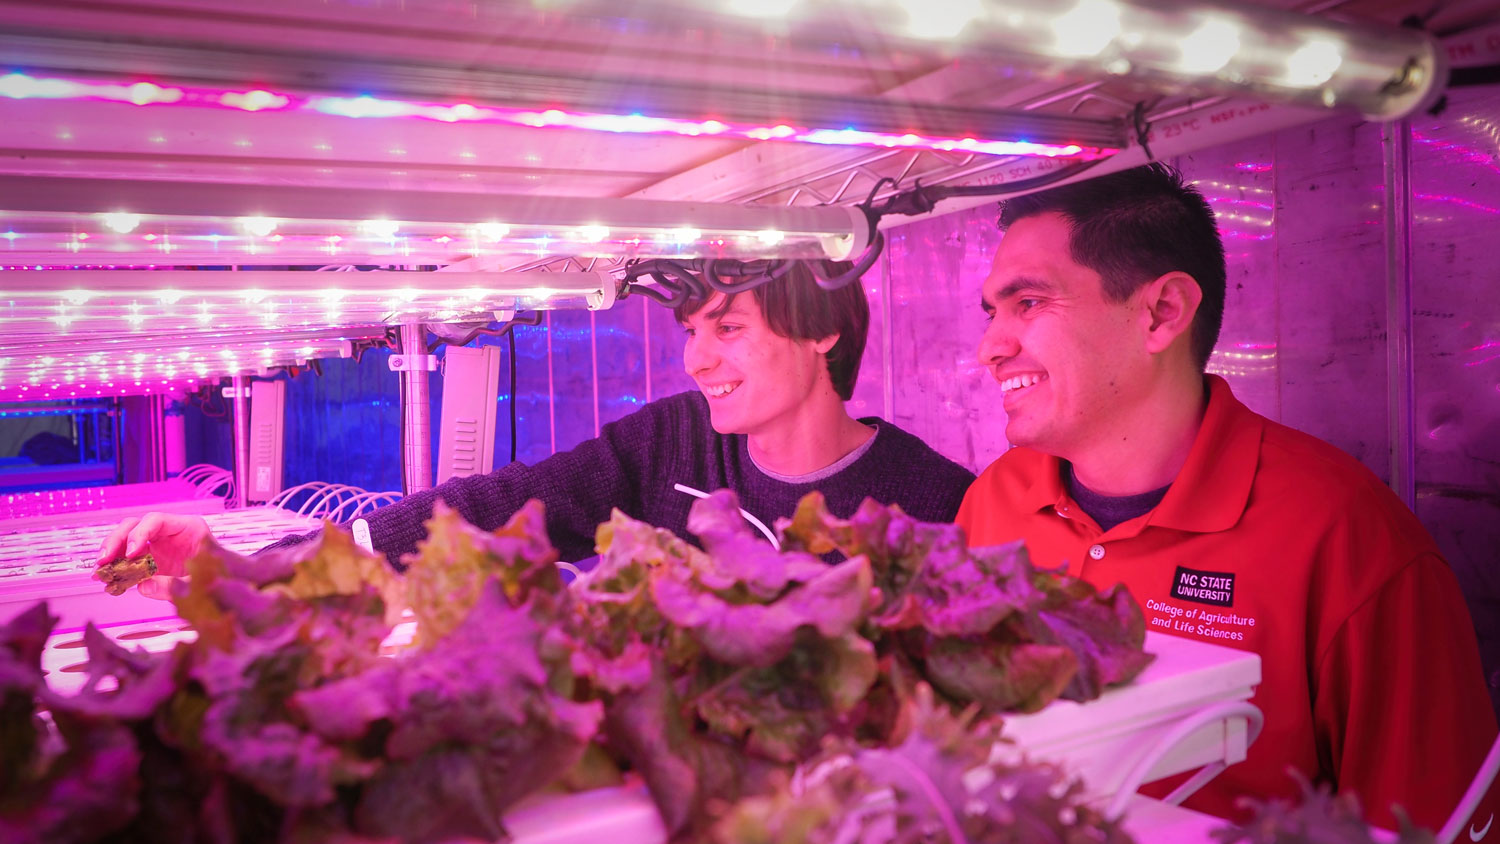 Two men looking at plants inside a large container garden with purple lights.